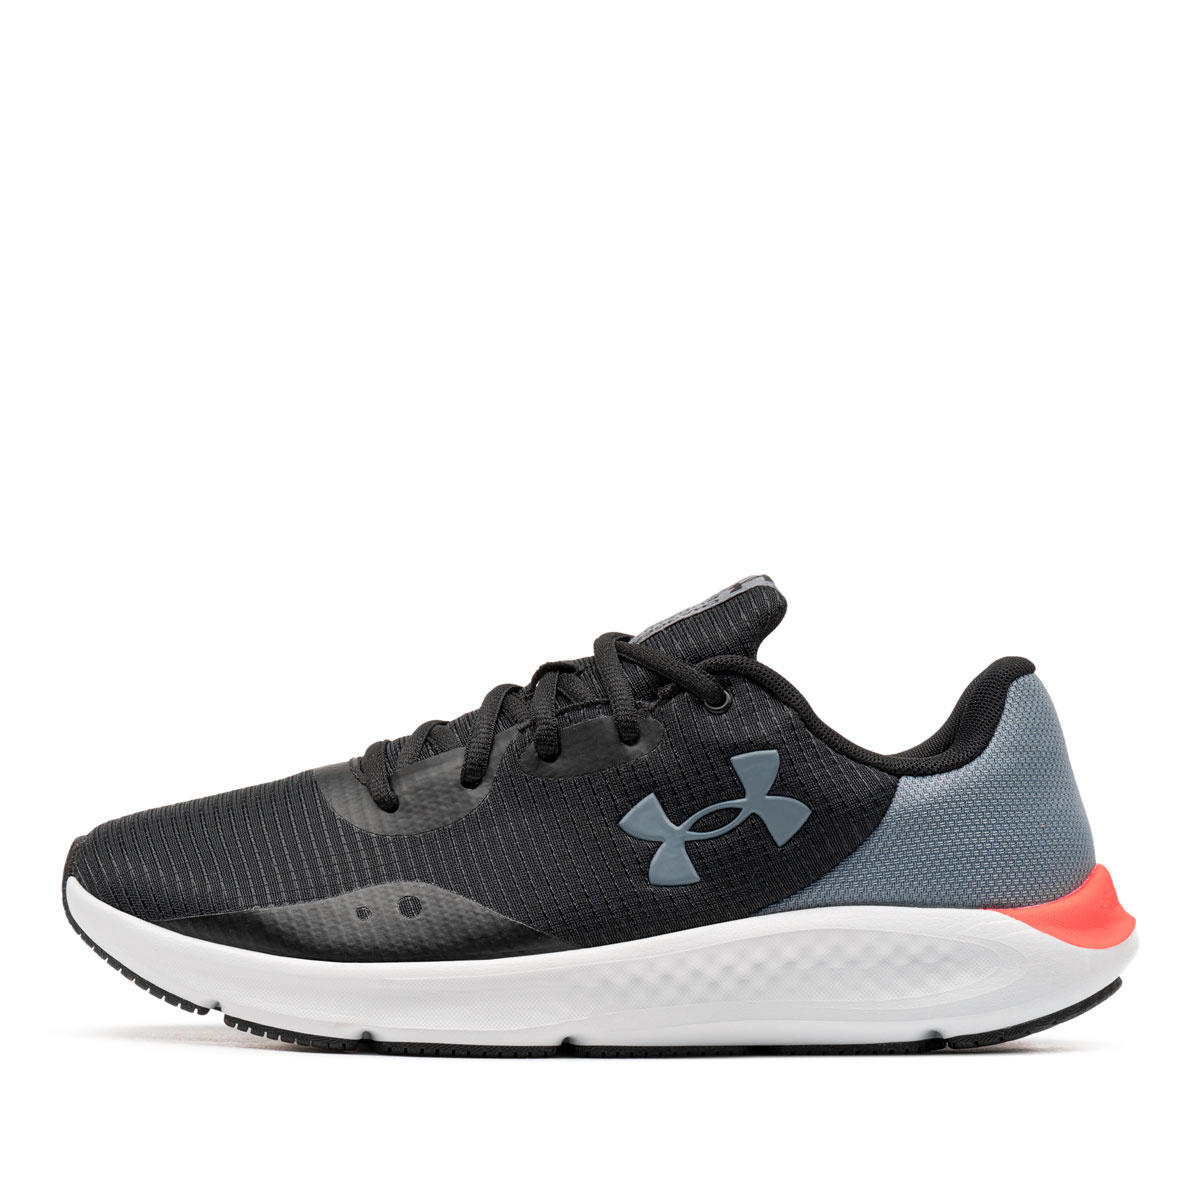 Under Armour Charged Pursuit 3 Tech Мъжки маратонки 3025424-003